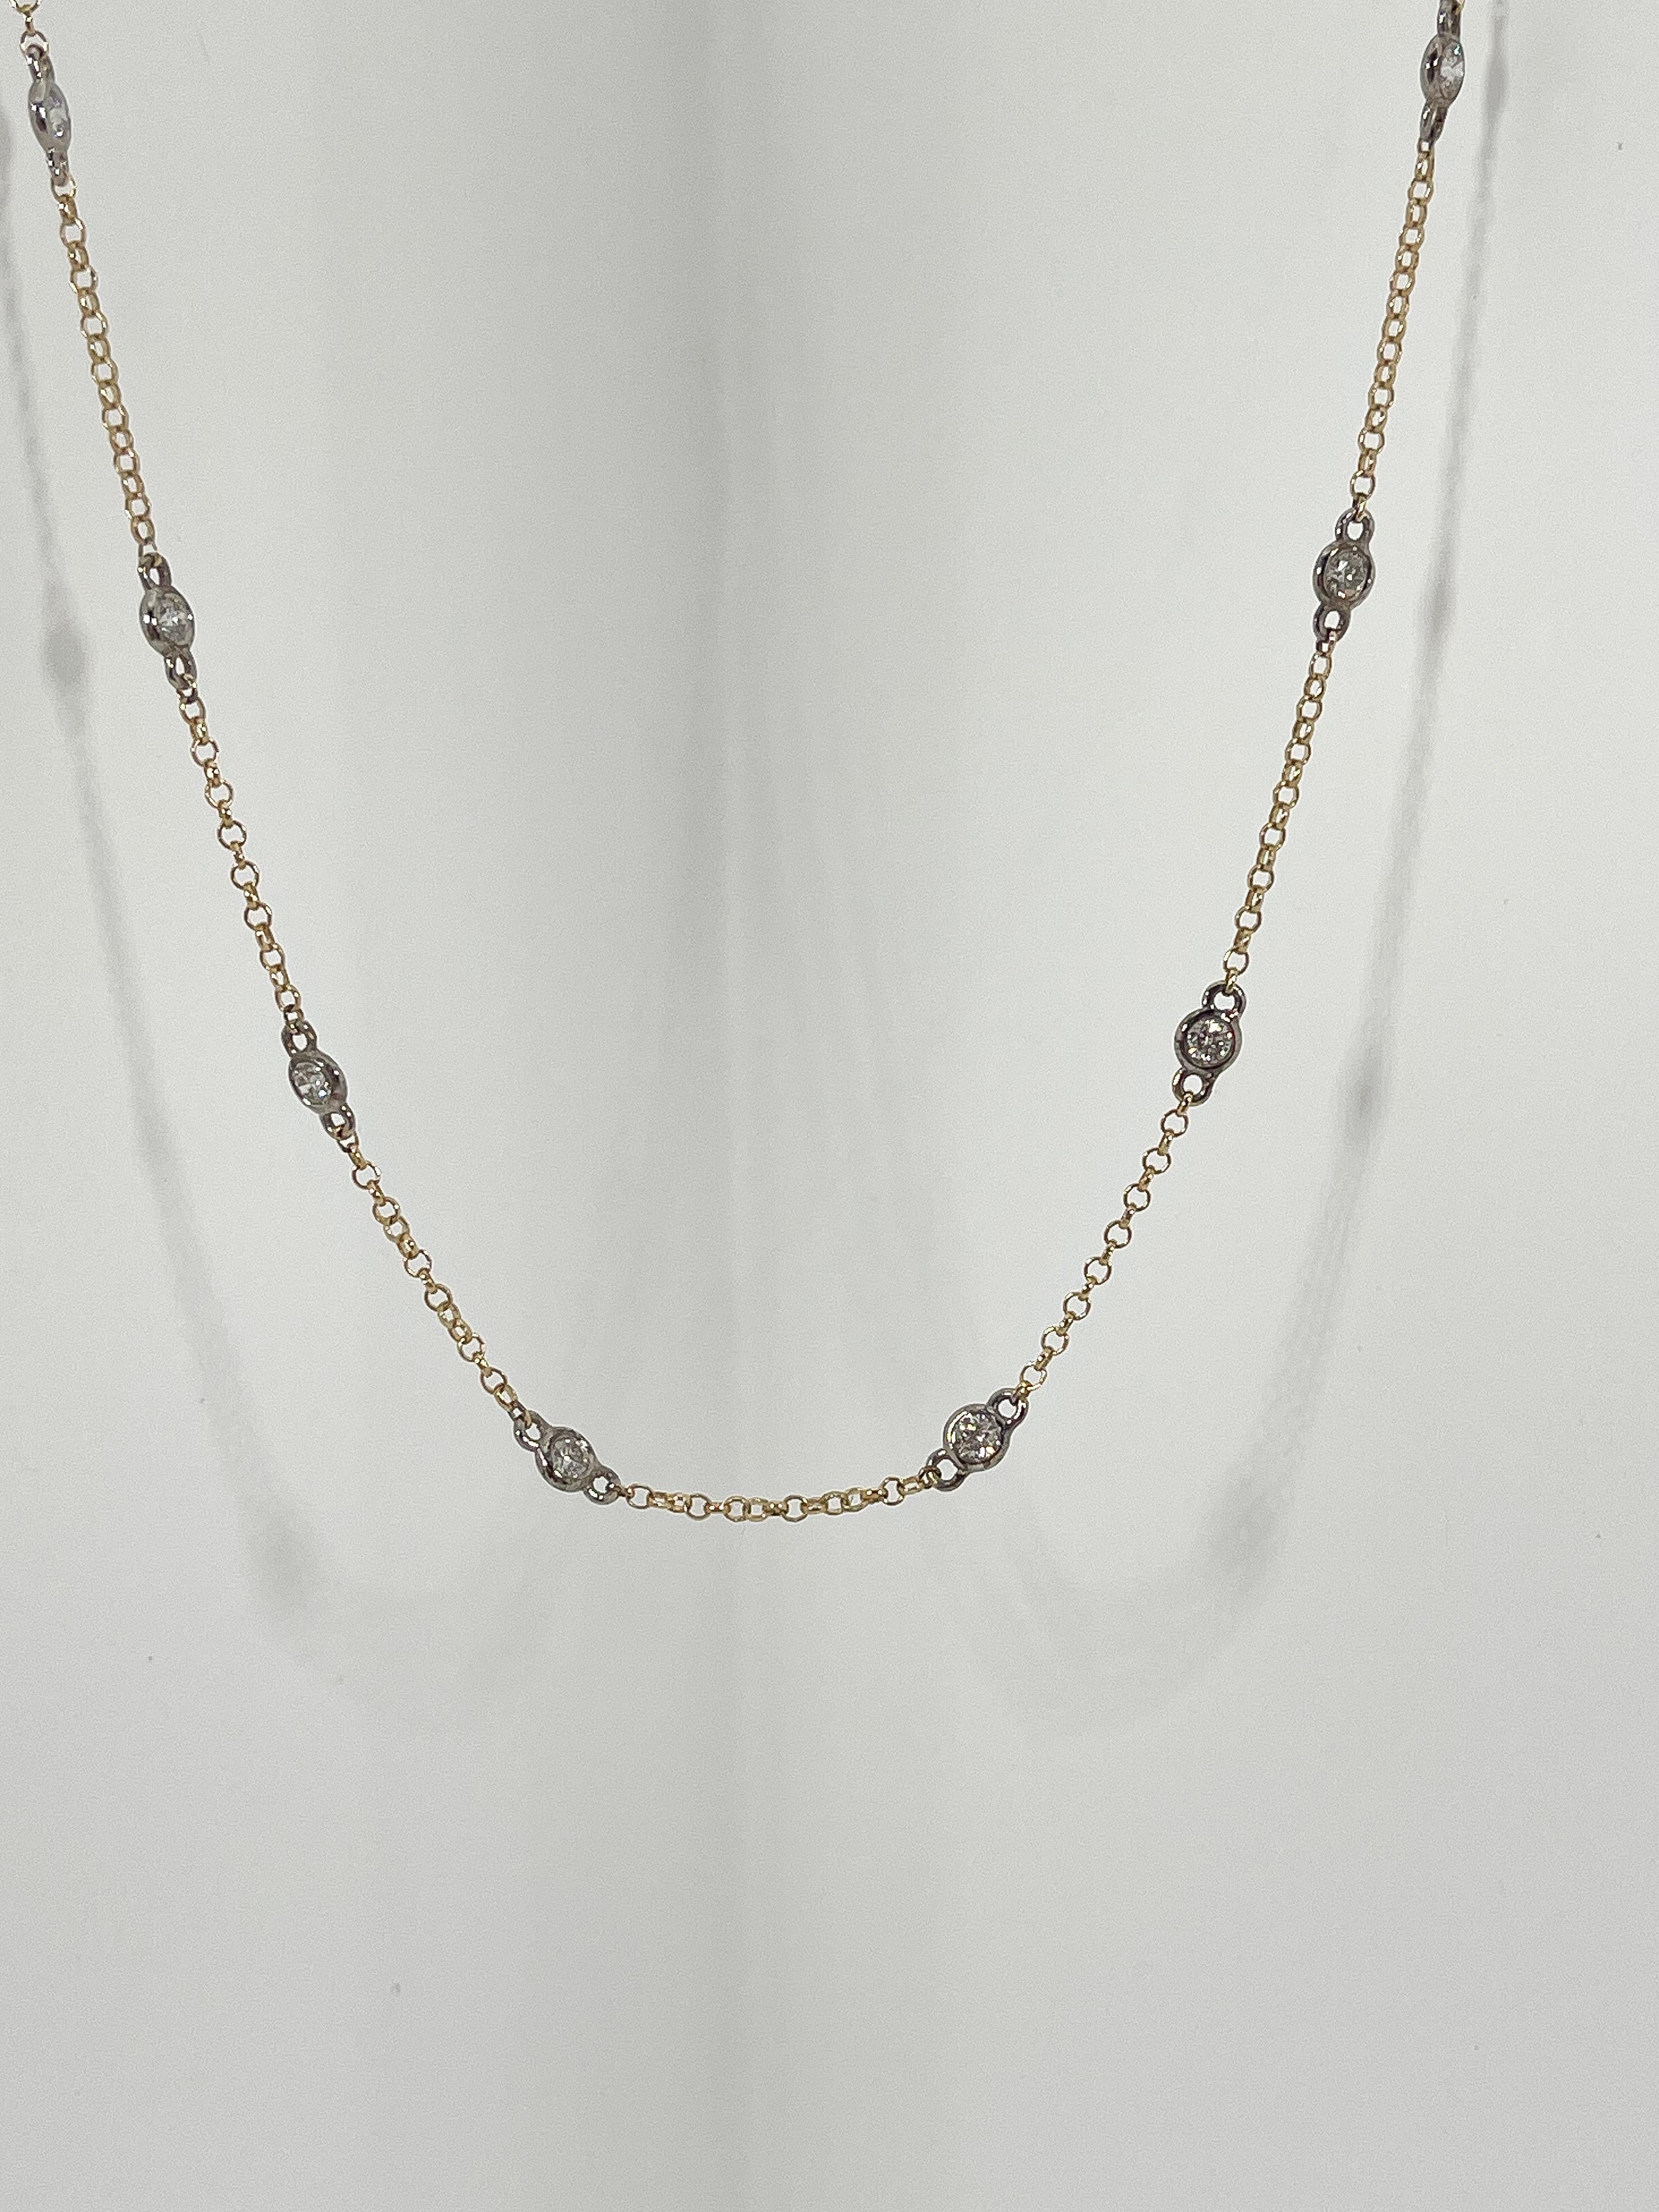 14k two toned diamonds by the yard necklace .75 CTW. The chain is yellow gold and all 18 round diamonds are set in a white gold bezel. The length of the necklace measures 21 inches, and the weight of the necklace is 3.17 grams.